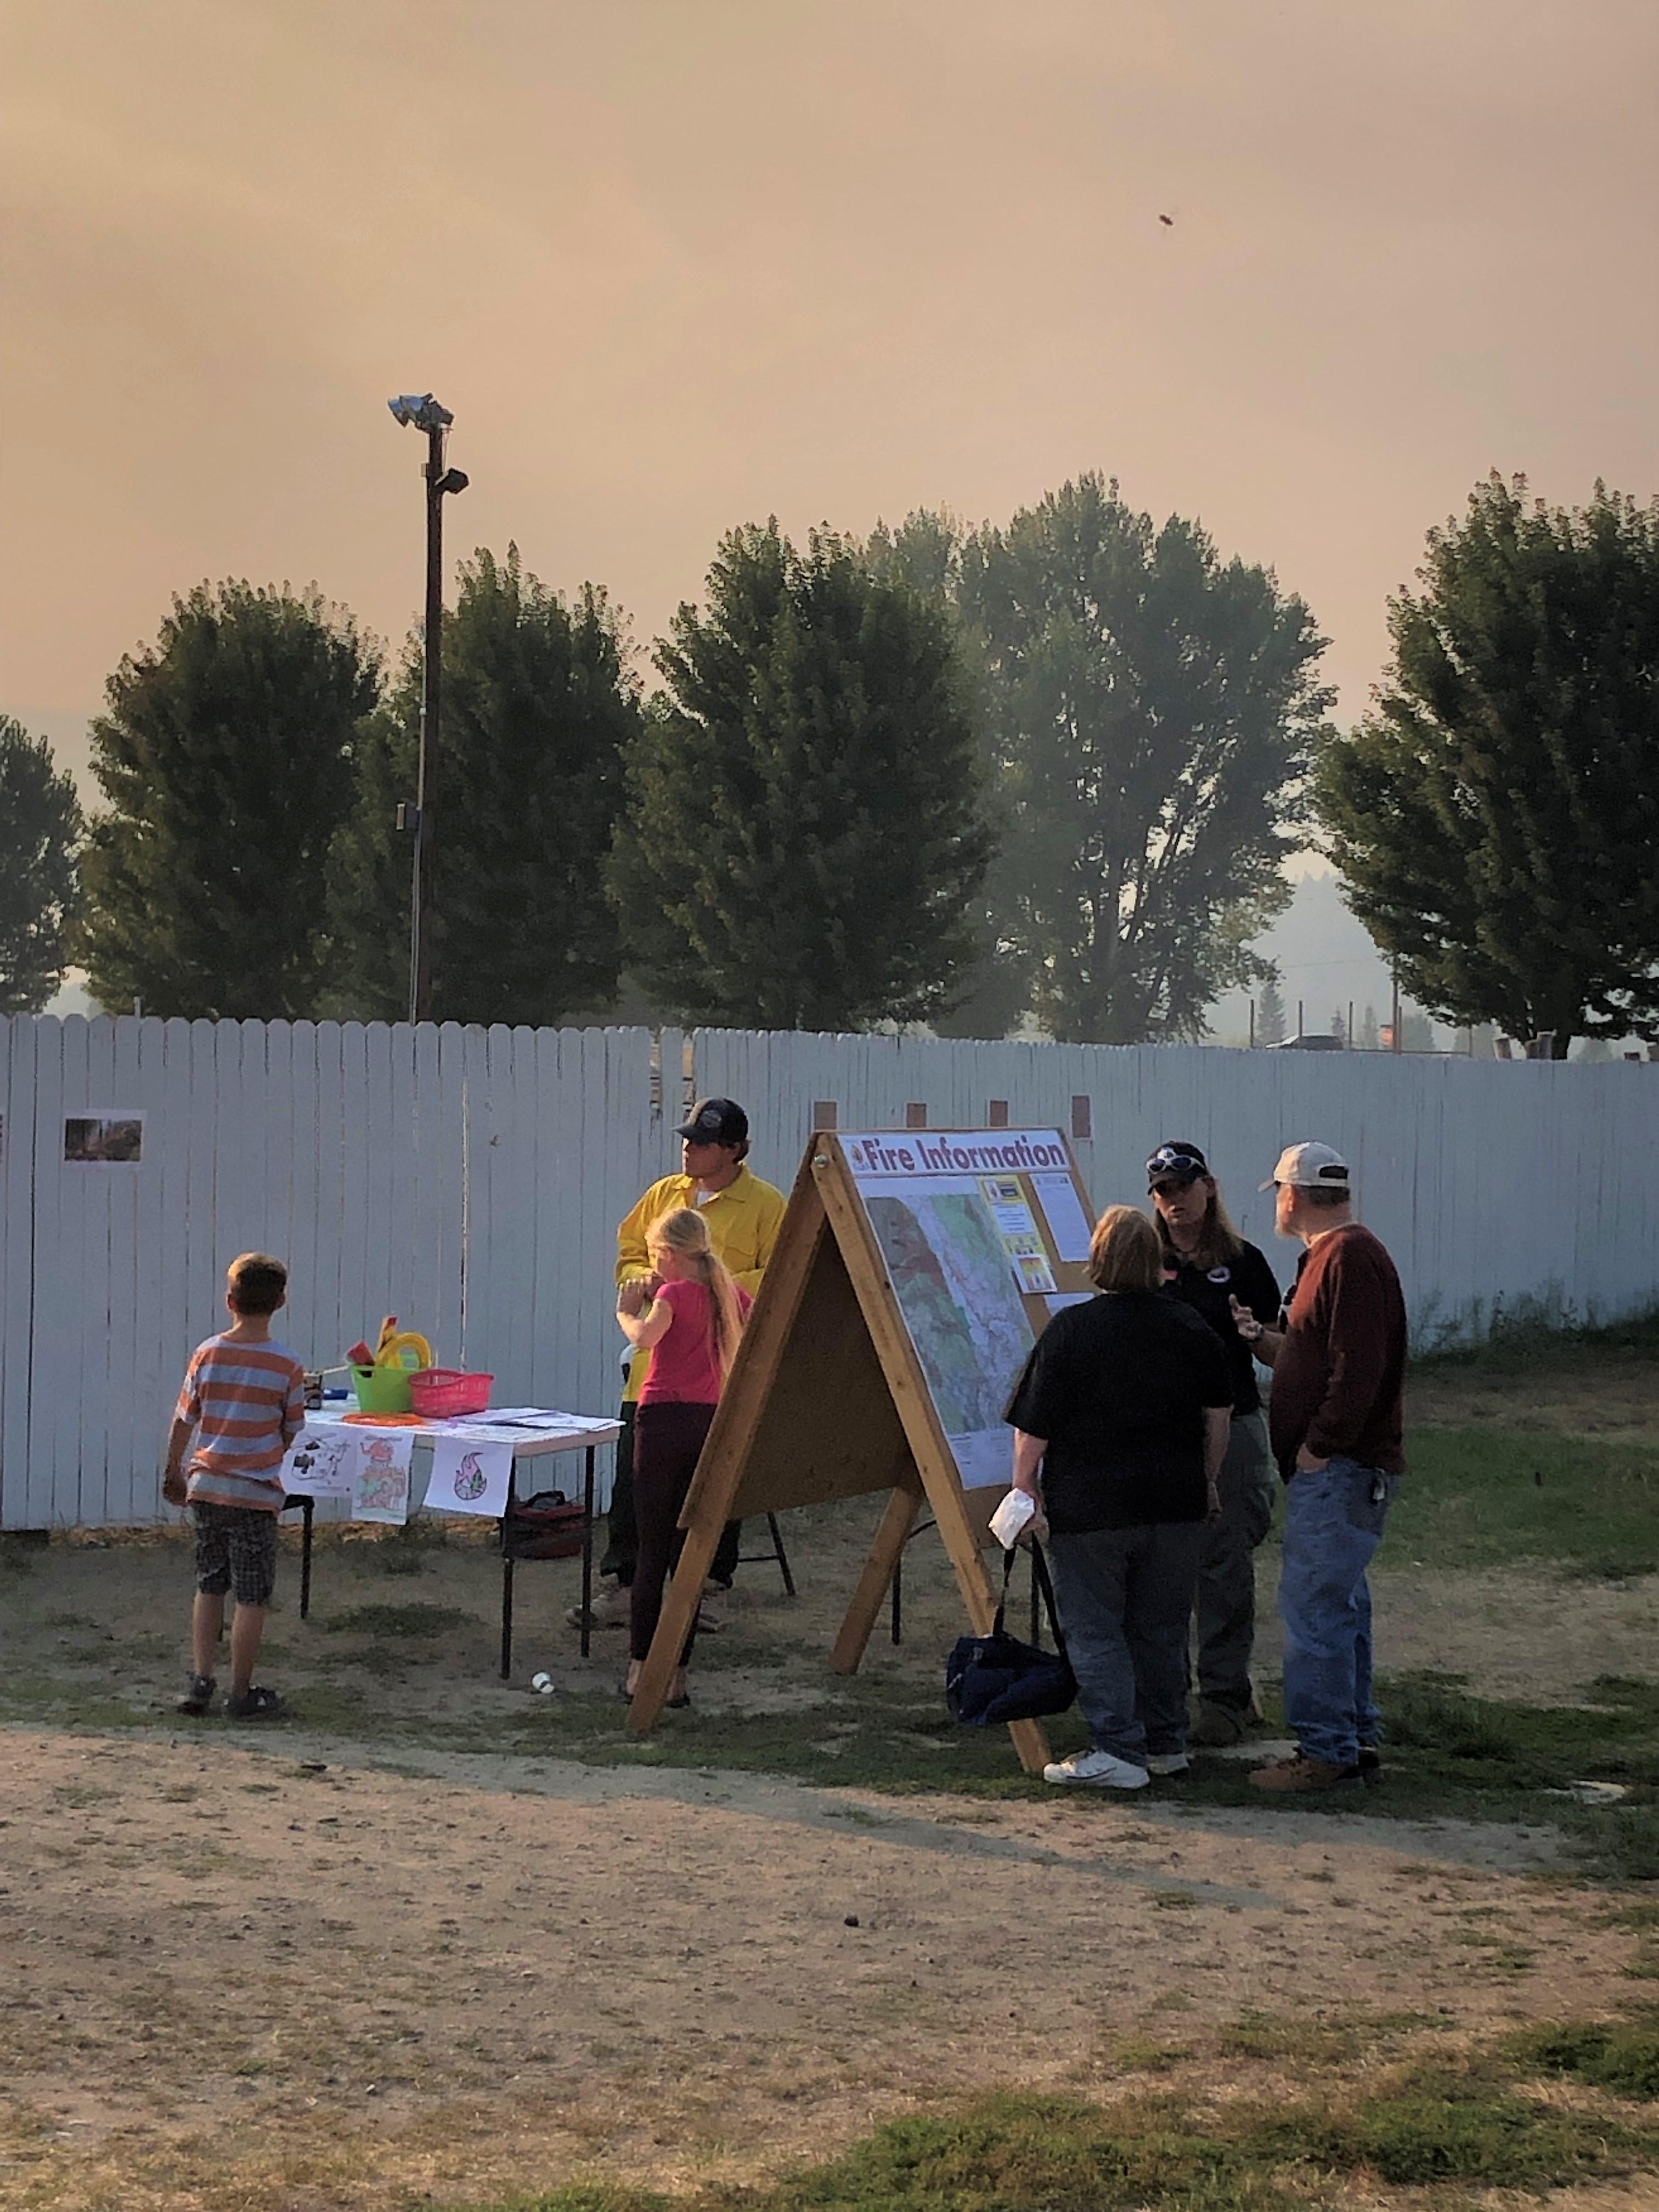 Fire Information at the Bonners Bash Demo Derby. Folks attending Derby could get information on the fire, along with kids activities. Two Fire Information Officers talking to folks at Information Board.